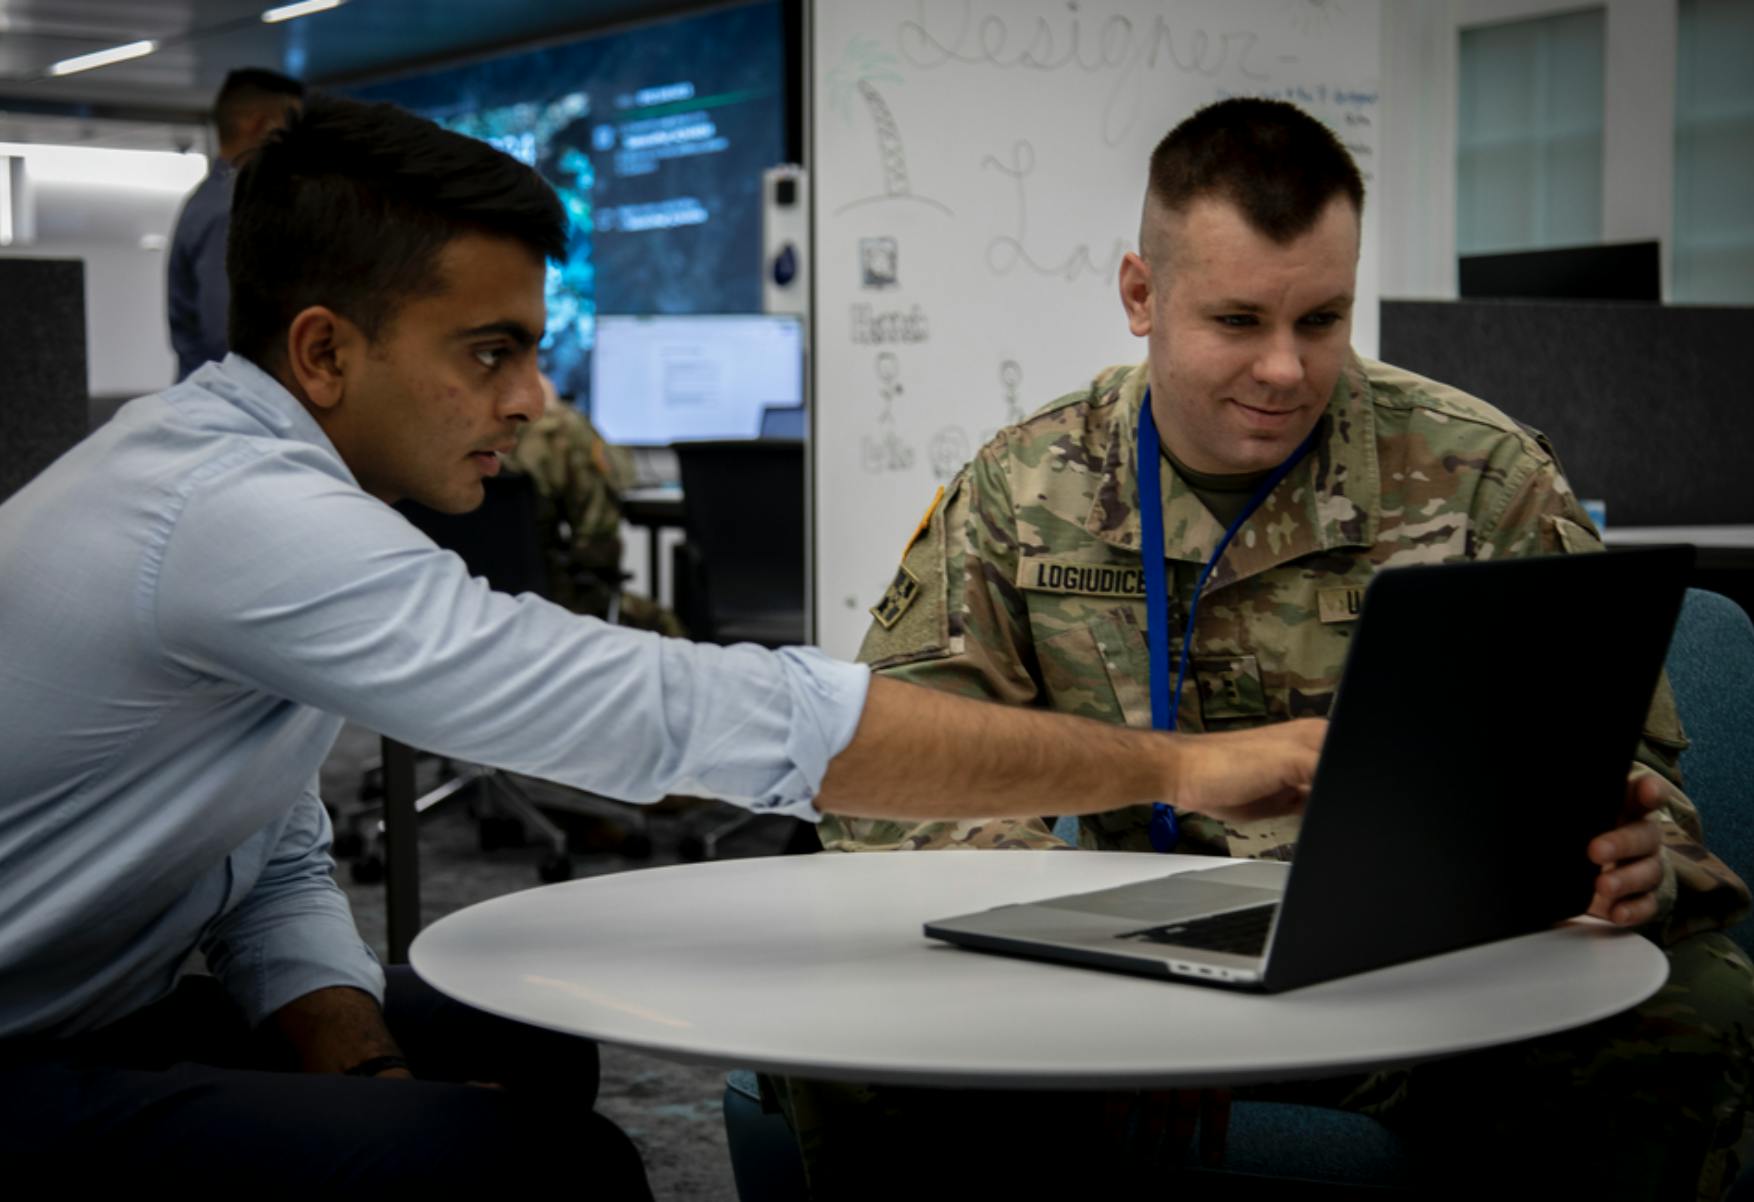 Image shows two men at a table with one man pointing at a laptop screen while the other looks on wearing fatigues. Related to: Army Futures Command, CDO, critical Software Factories, DOD Modernization.